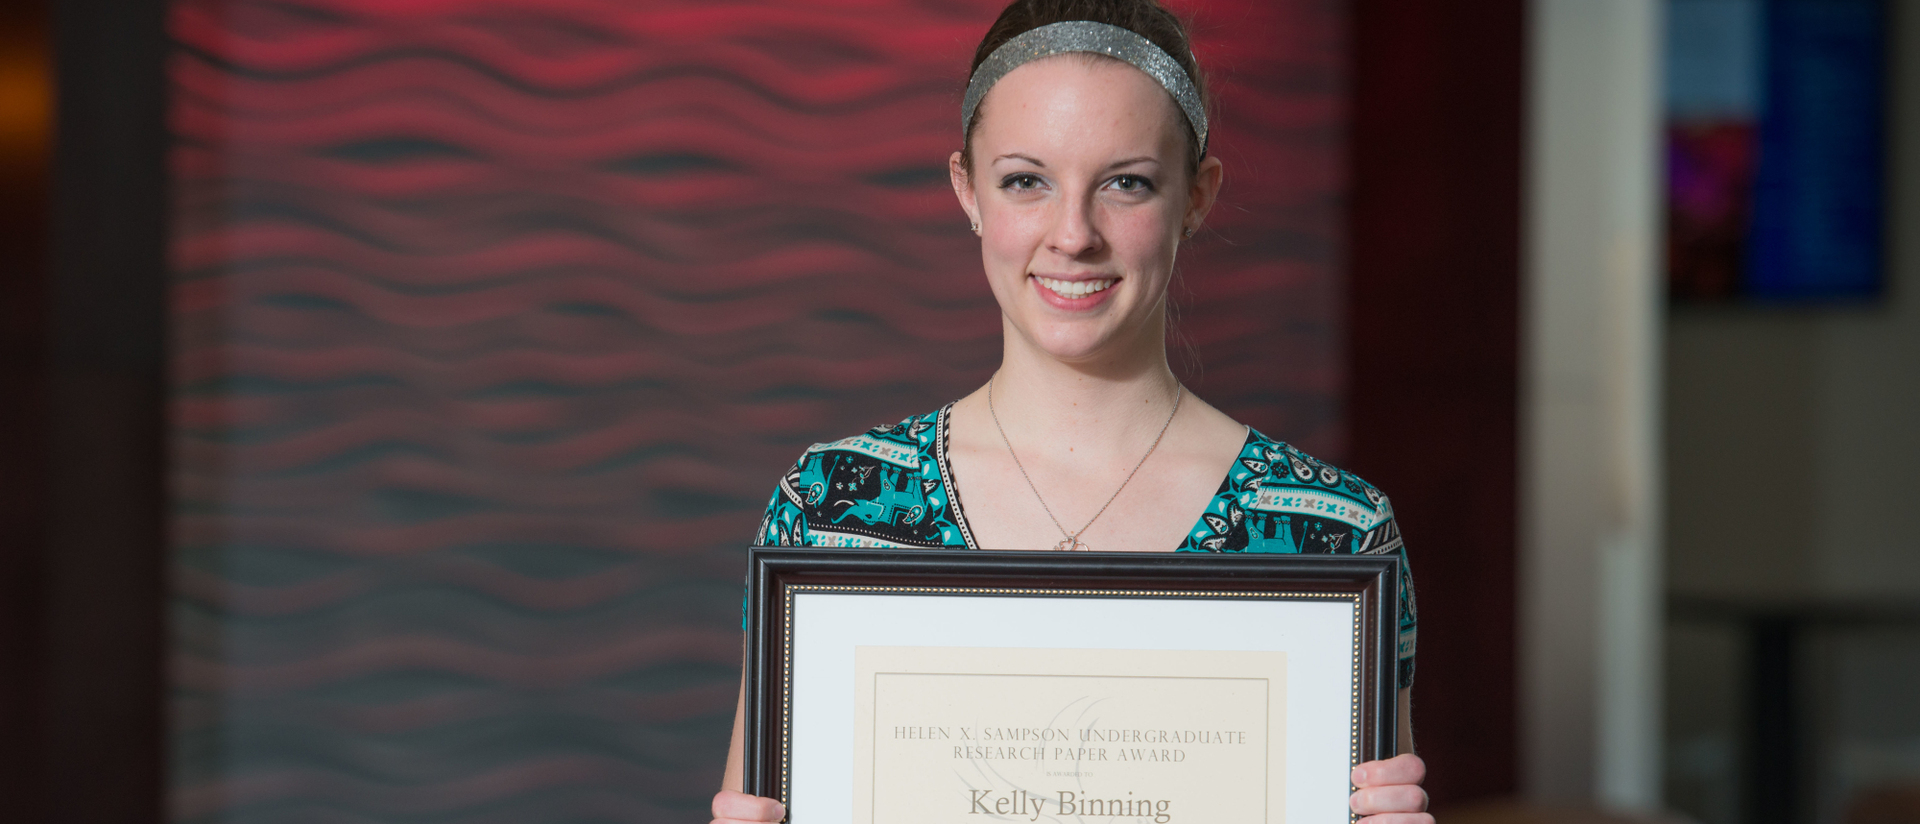 Student Kelly Binning with research award